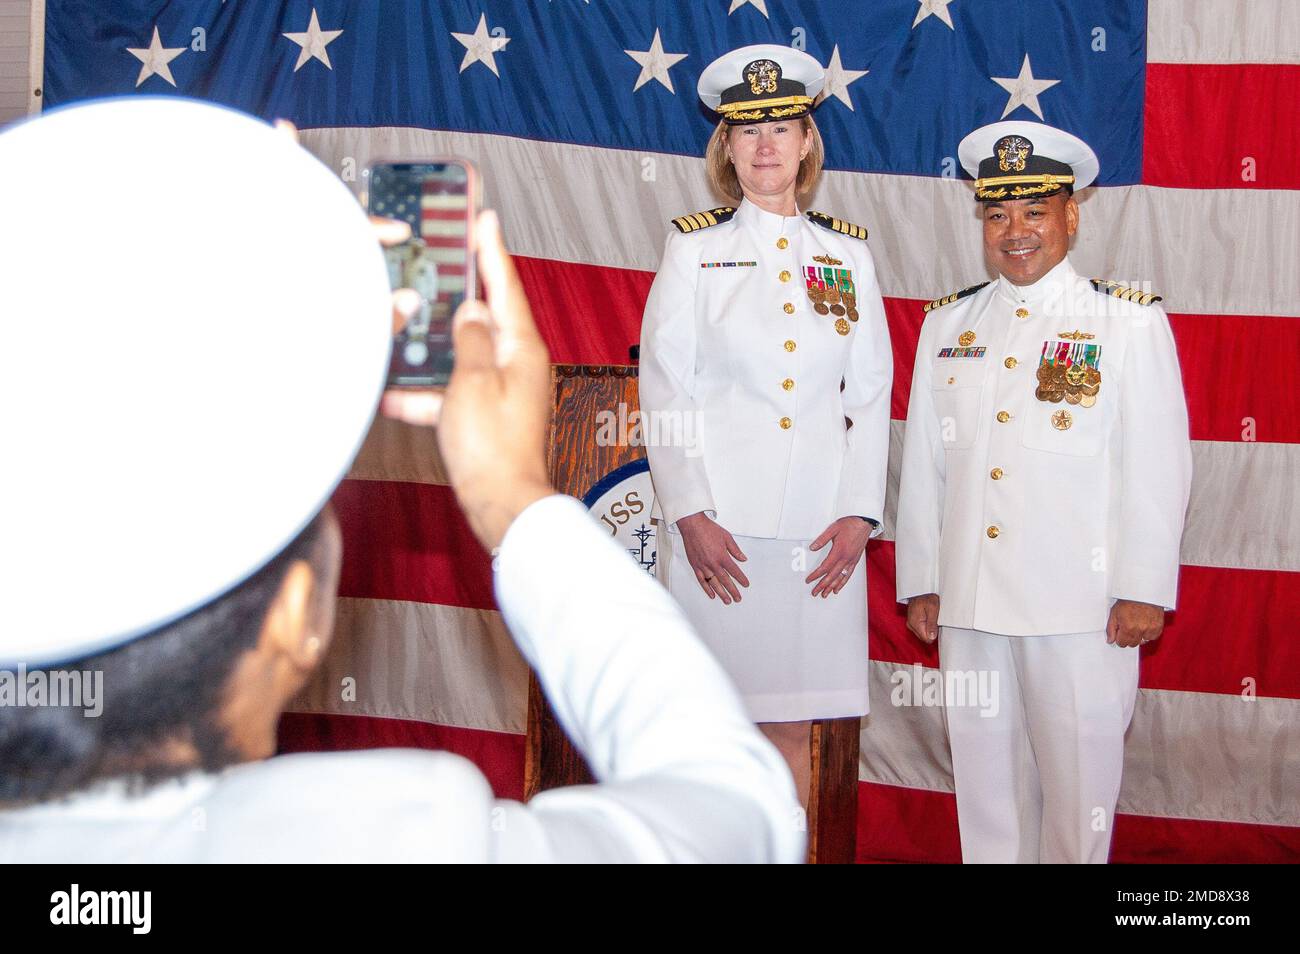 220714-N-YS140-001  A Navy Reserve Center (NRC) Alameda Sailor captures a picture of incoming commanding officer Capt. Kerri Chase aside outgoing commanding officer Capt. Roberto Dumlao at an NRC Alameda change of command ceremony aboard the USS Hornet (CV 12), Alameda, Calif., July 14, 2022. NRC Alameda was established after World War II and increased activity in the wake of the attacks on 9/11. The mission of the NRC is to provide customer service and enhance the mobilization readiness training for over 650 Navy Reservists. NRC Alameda is manned by 2 officers, 23 enlisted personnel and one D Stock Photo